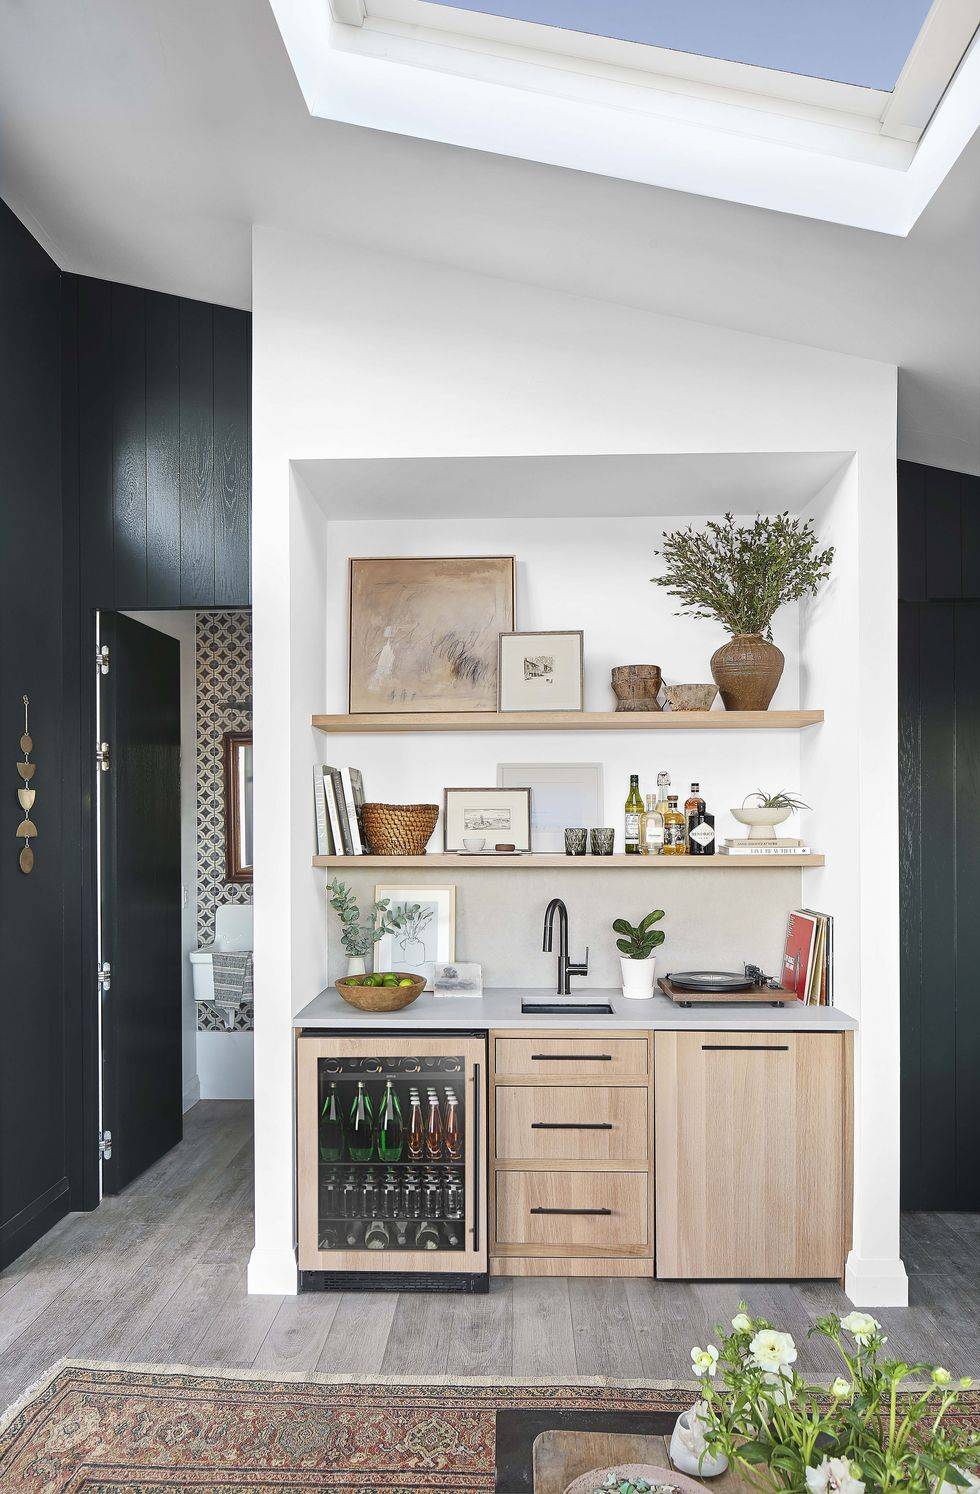 Compact kitchenette with lots of charm (from House Beautiful)